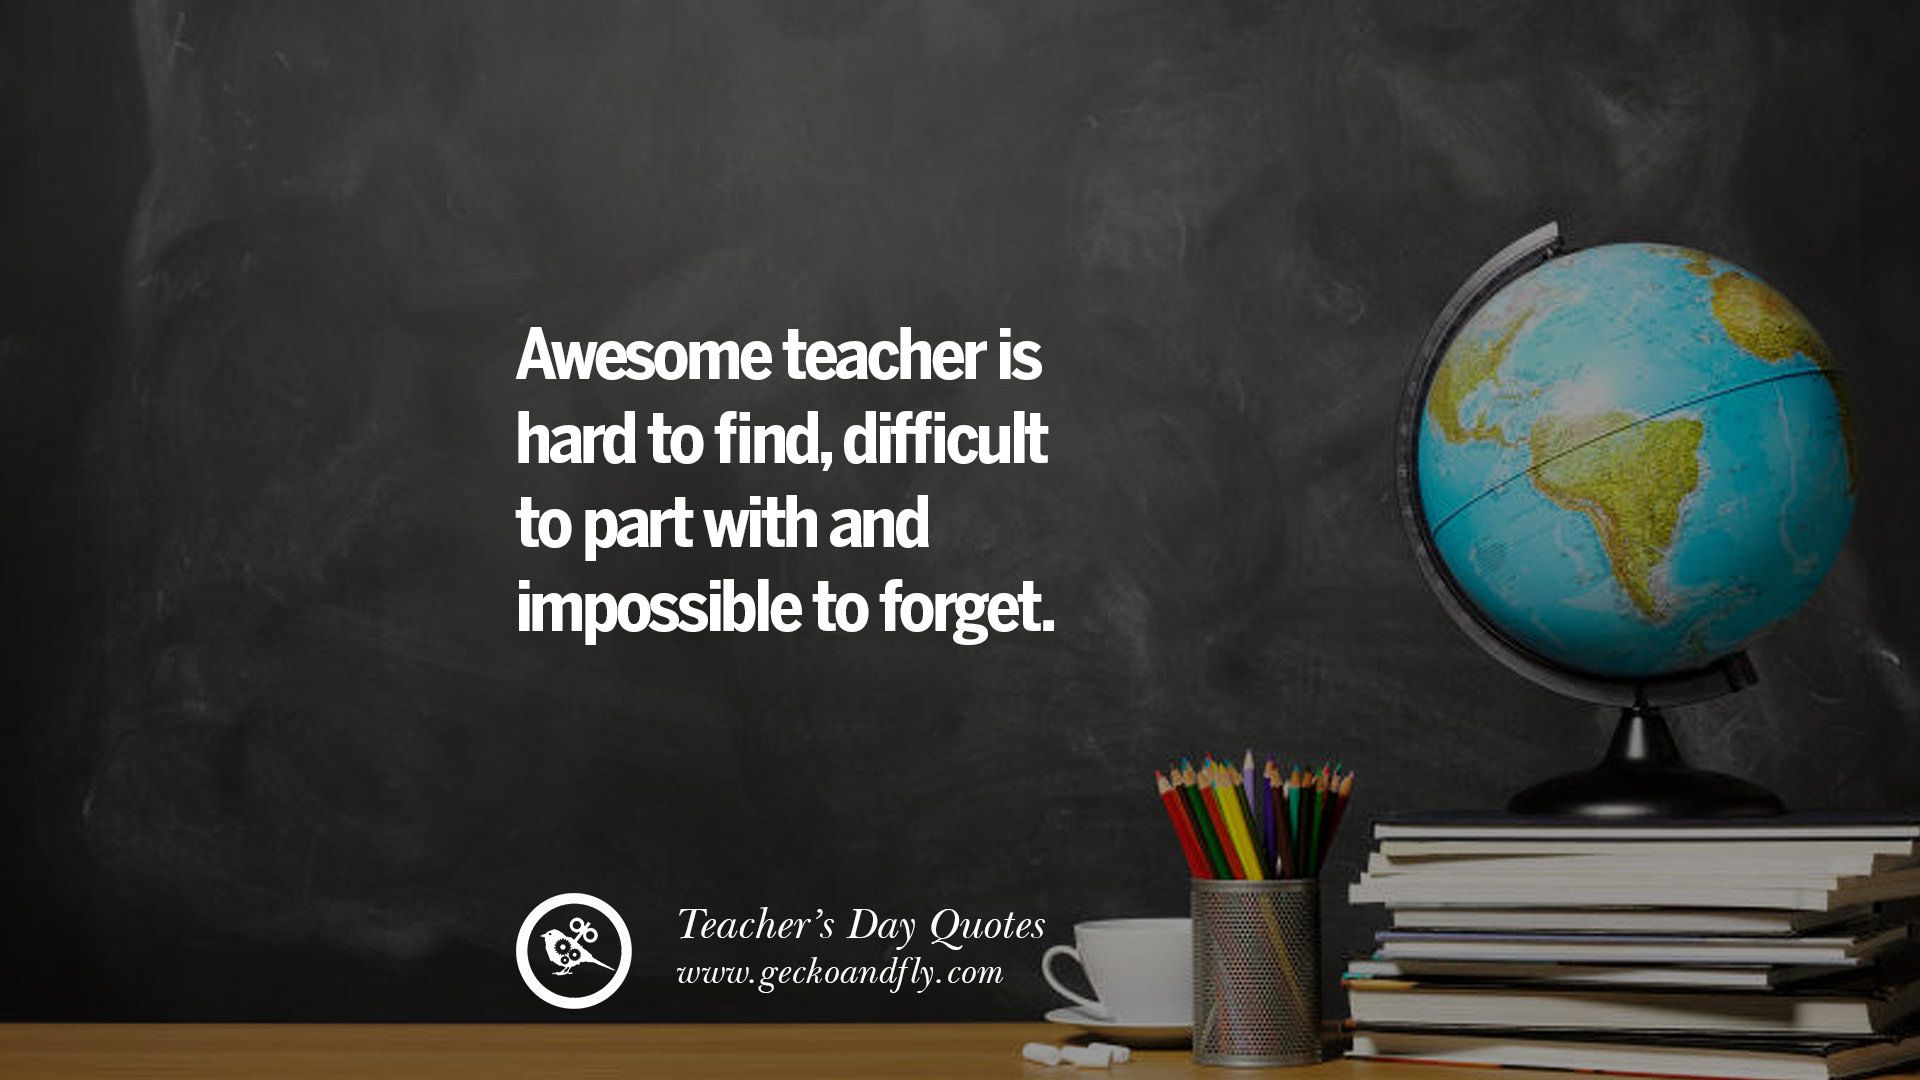 Happy Teachers' Day Quotes & Card Messages